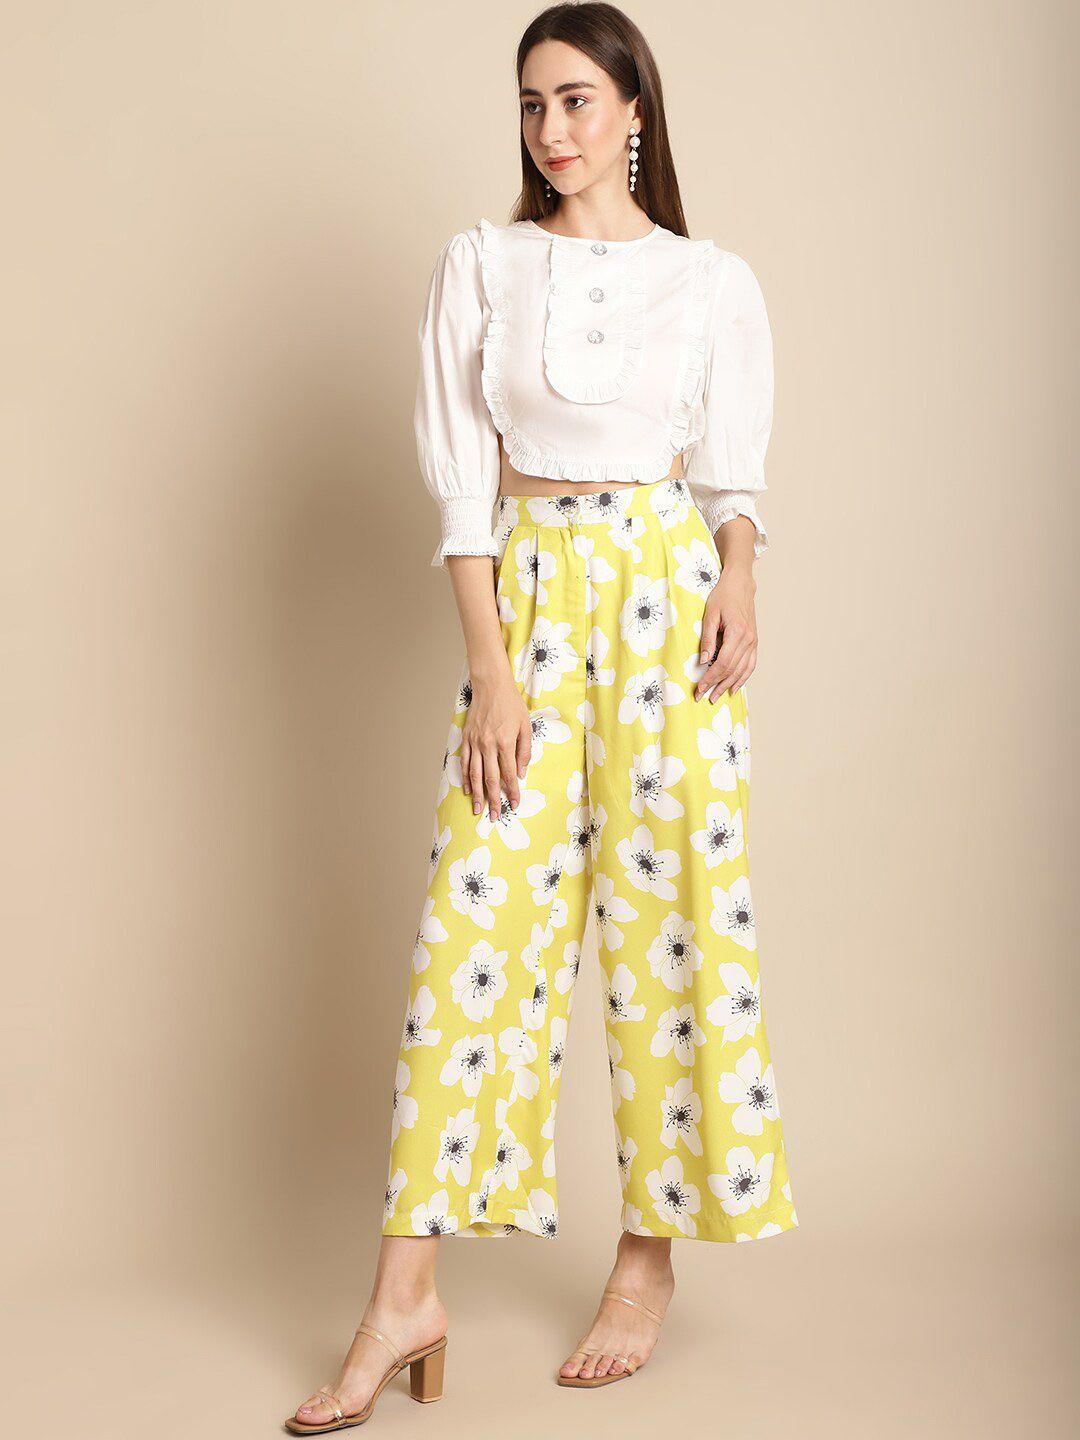 blanc9 floral printed frills top with palazzos co-ords